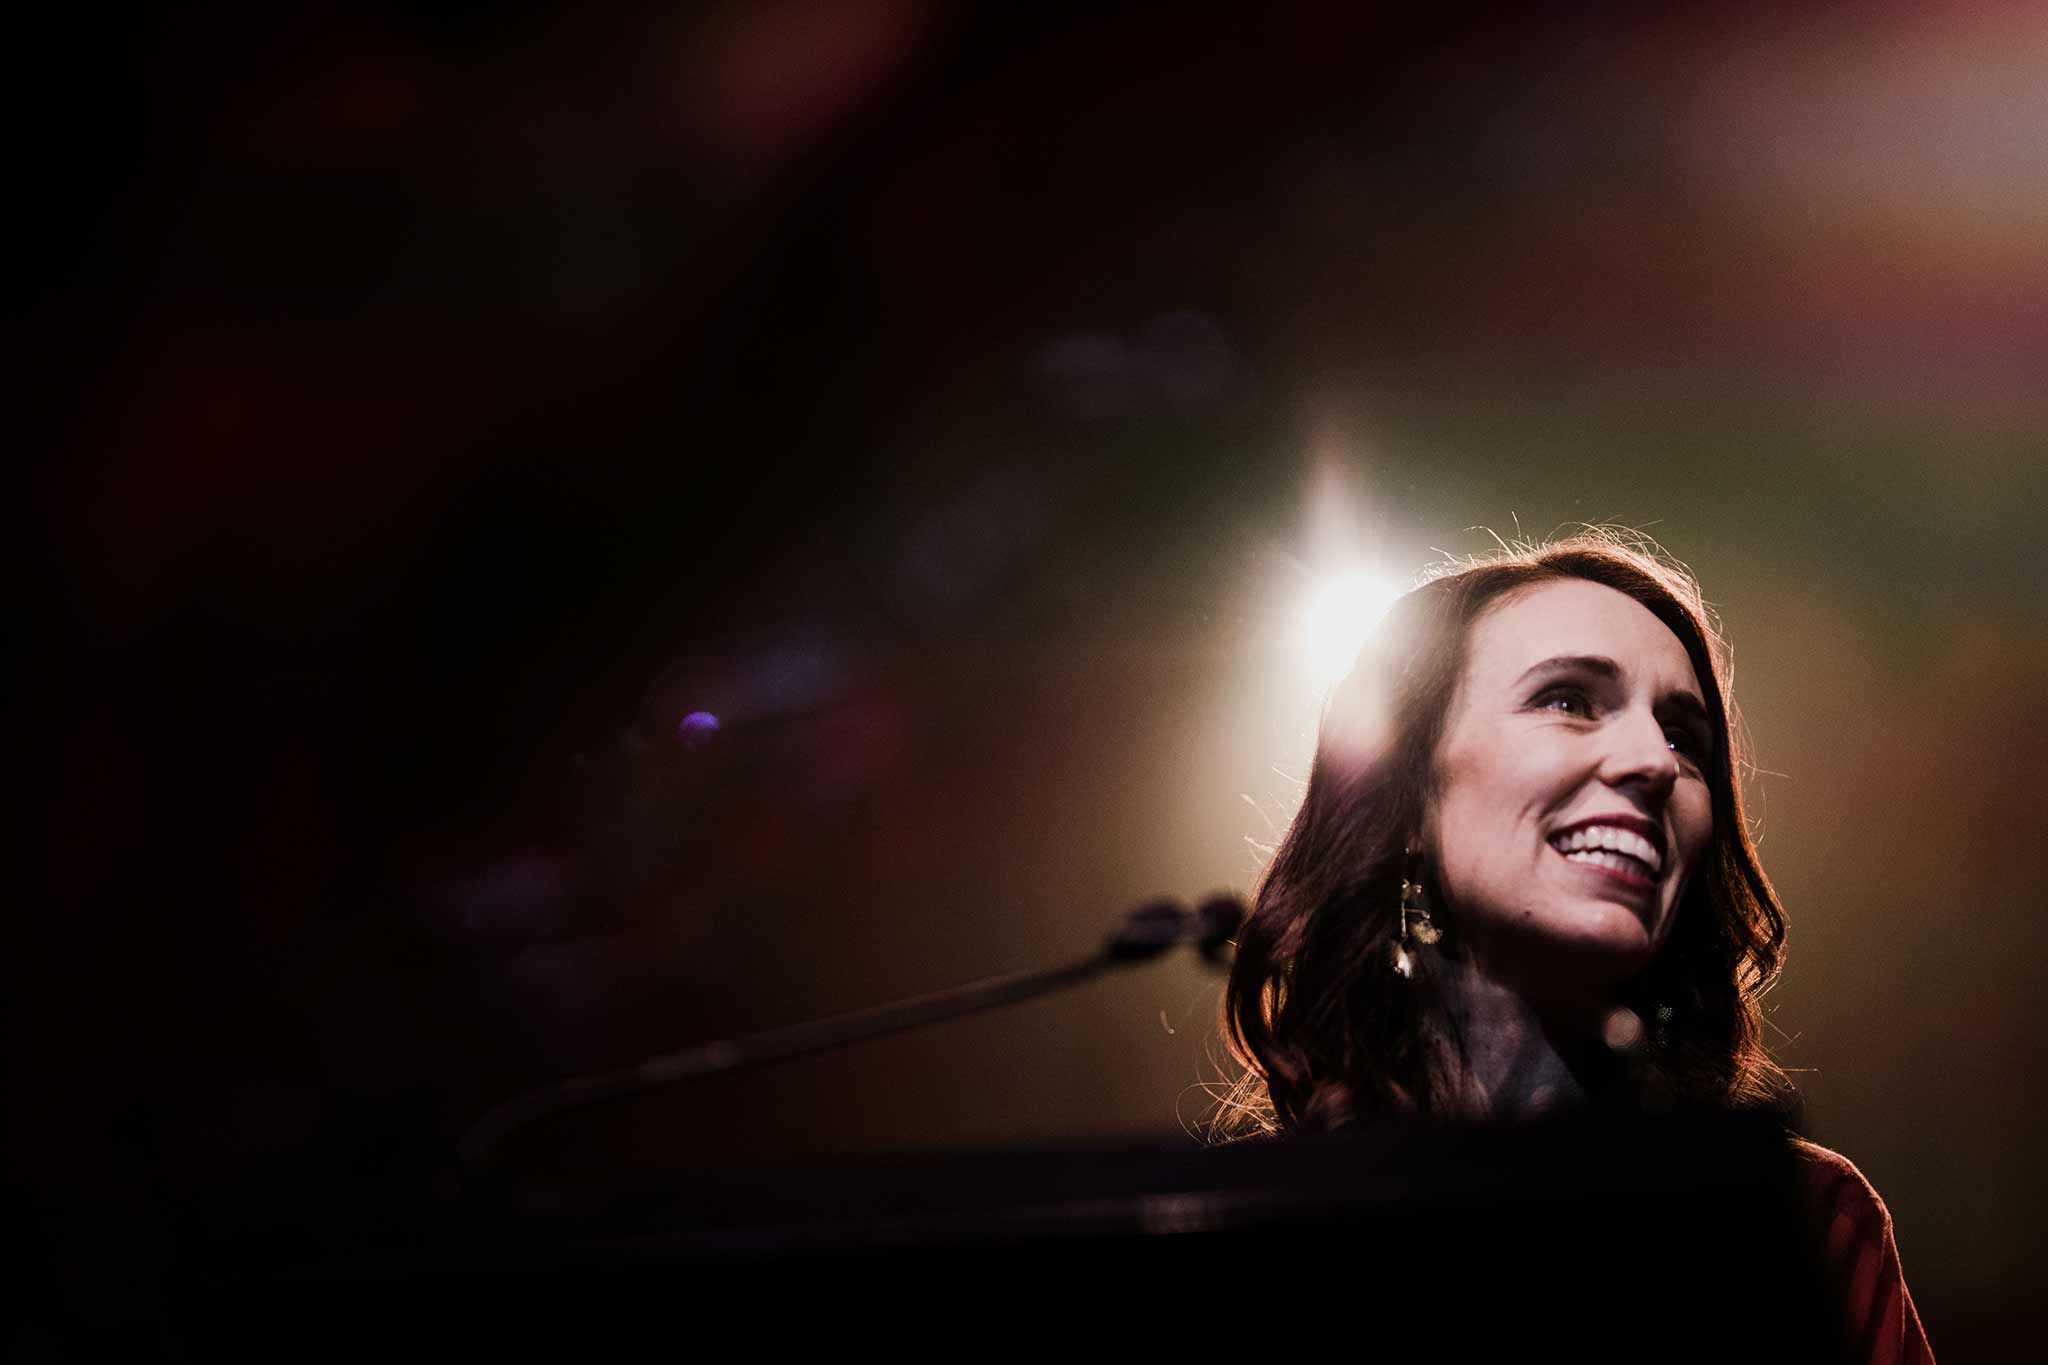 Photo of Jacinda Ardern smiling in the foreground with a light behind her.